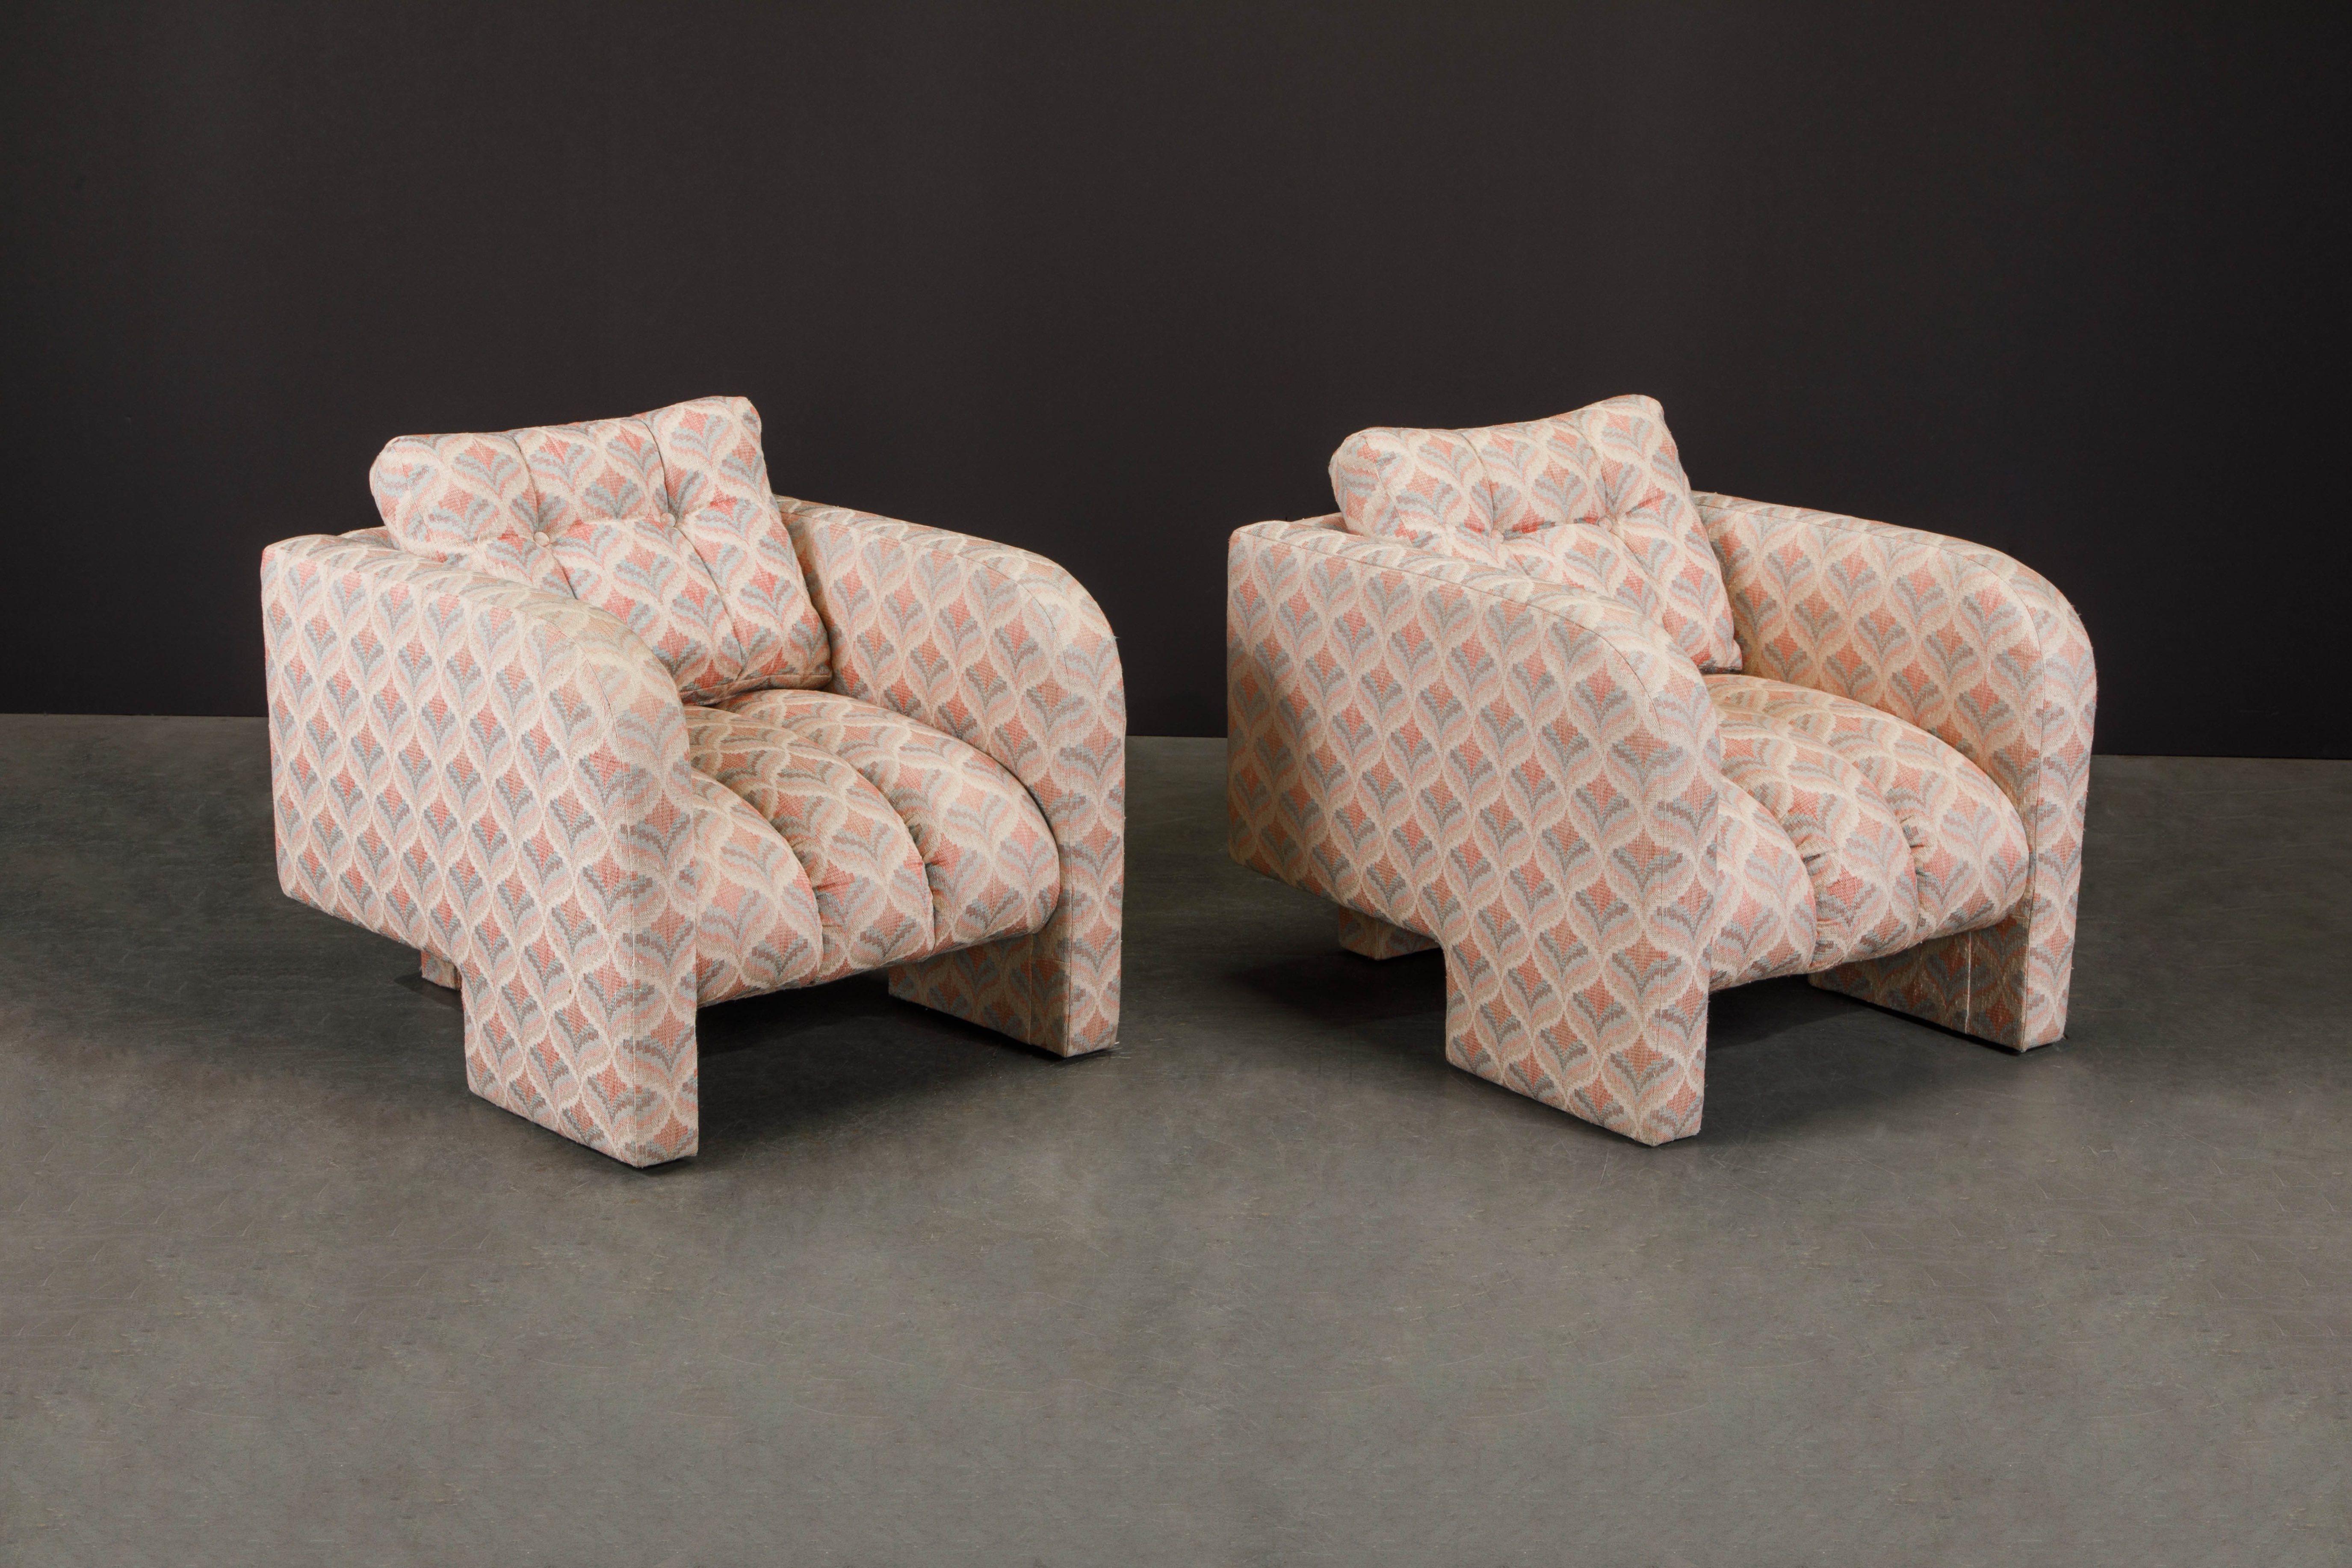 American Post-Modern Channel Tufted Lounge Chairs, Attributed to Vladimir Kagan, 1980s For Sale